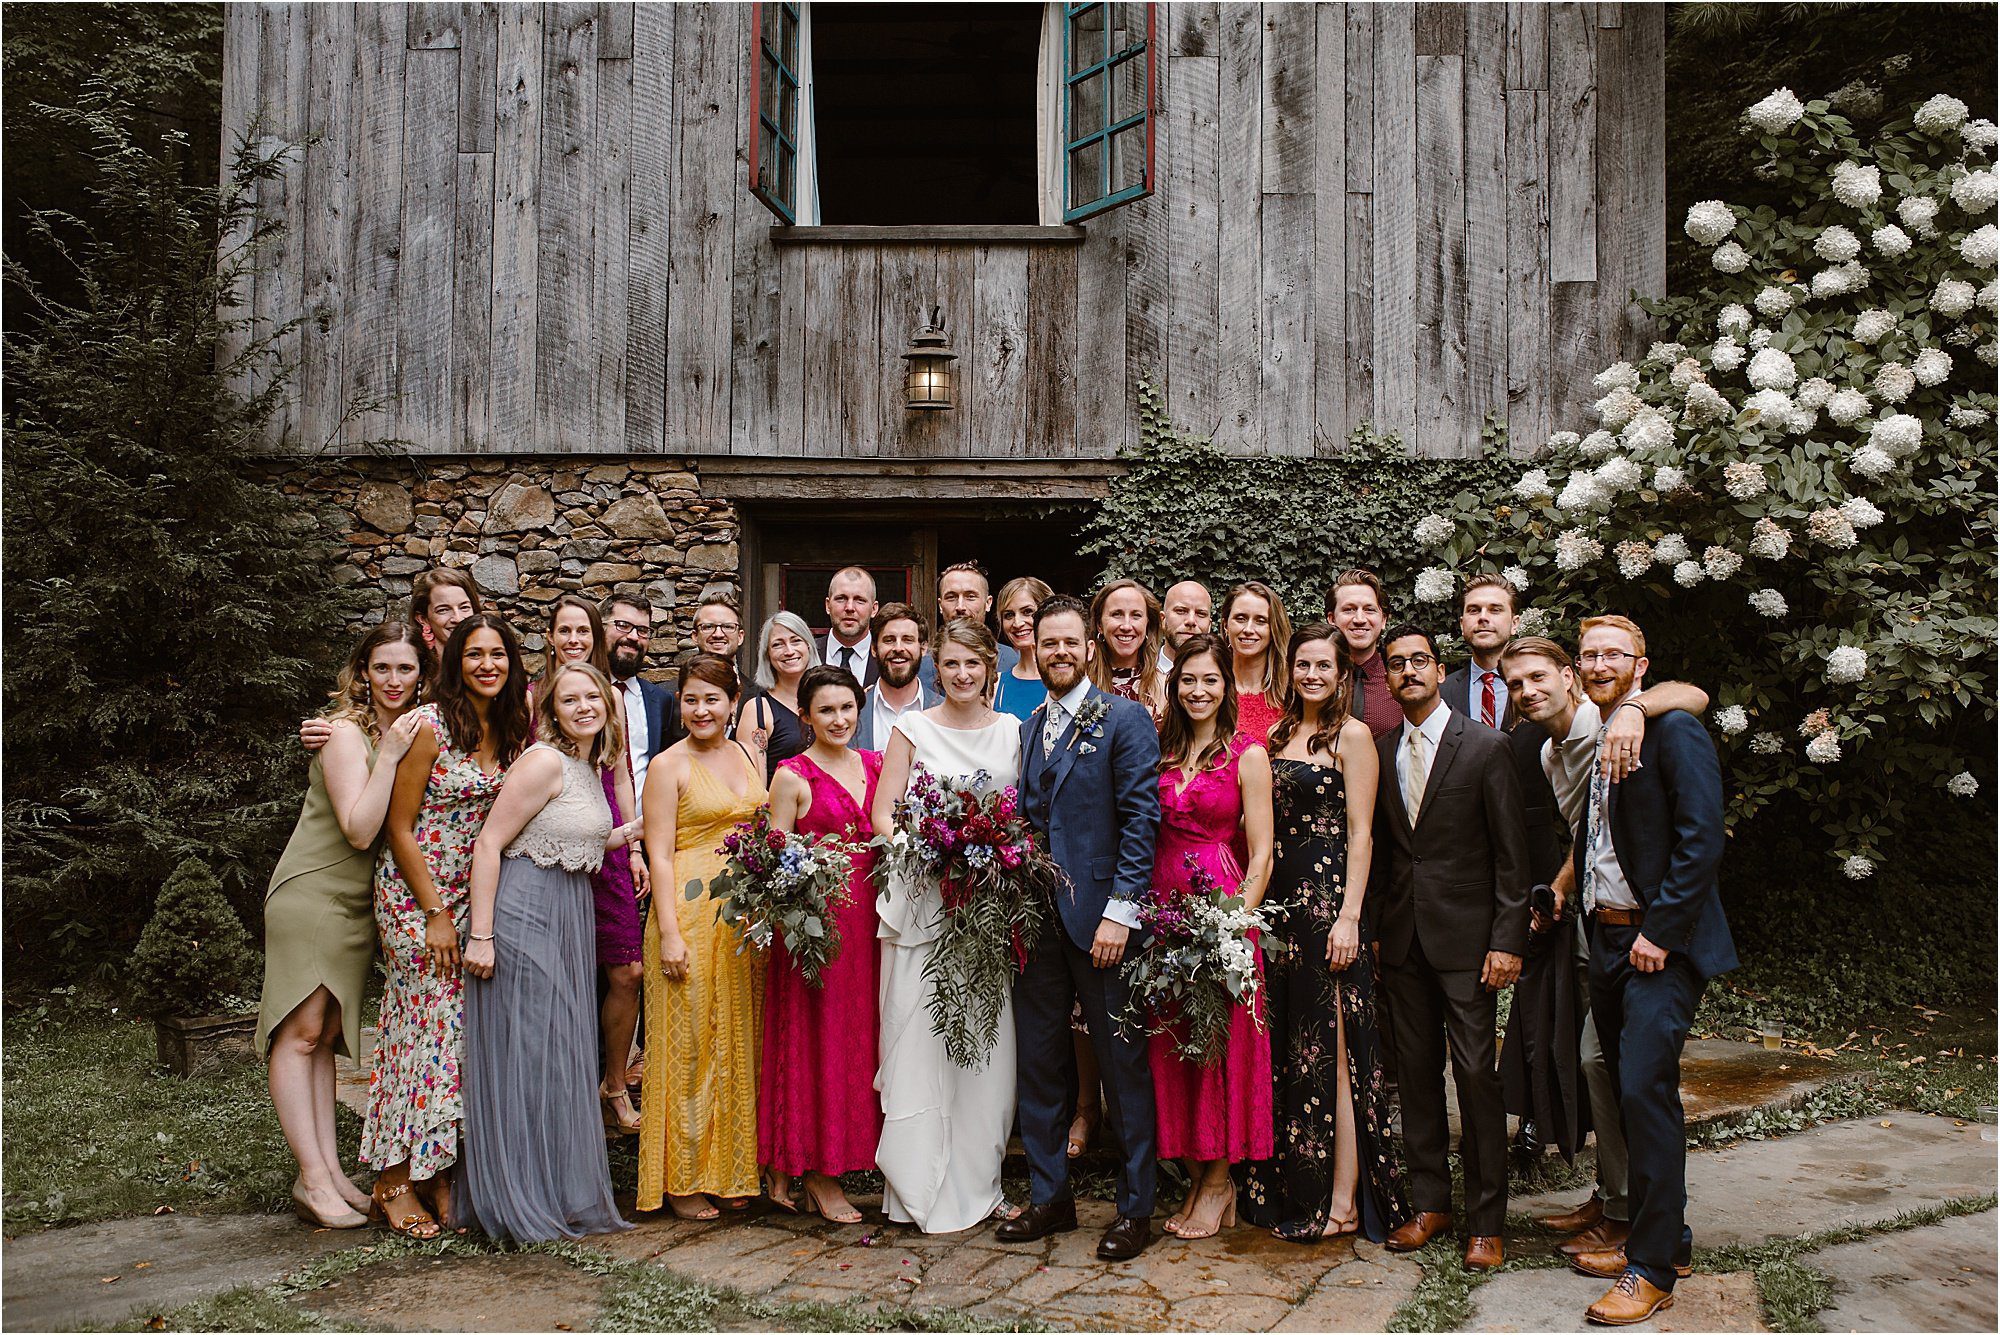 guests and attendants in colorful wedding attire at wildflower wedding